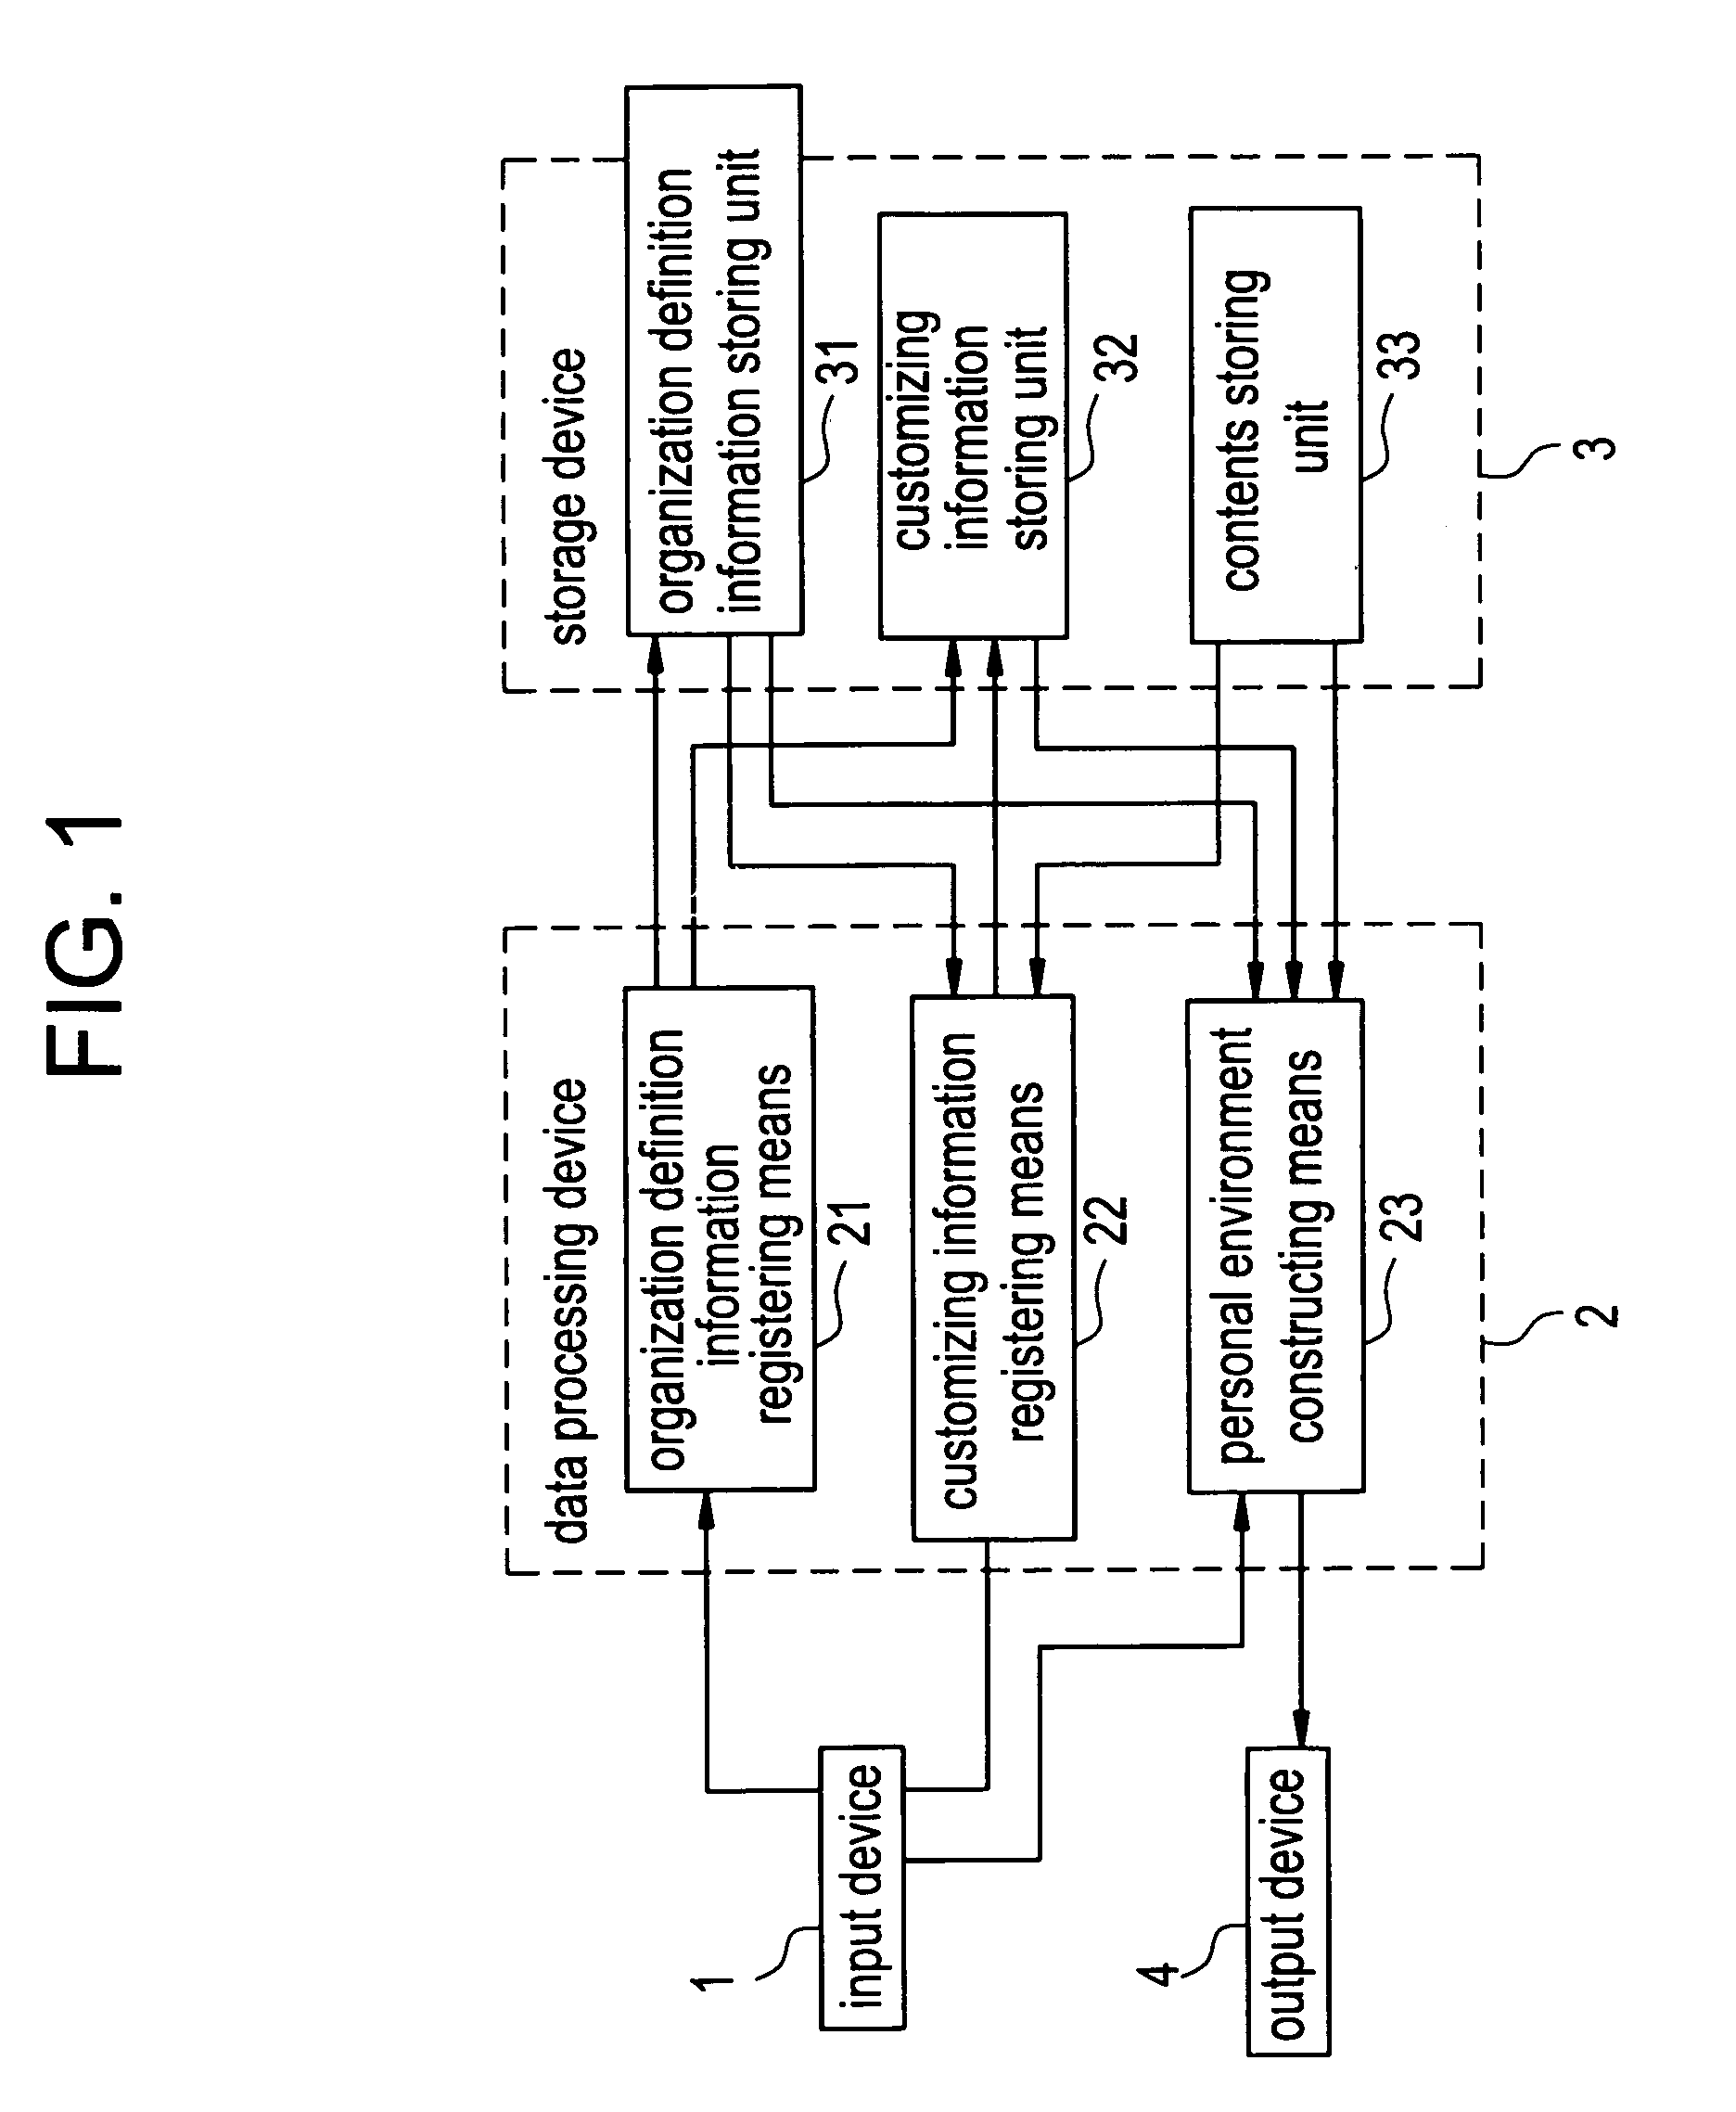 Business information system and method of managing business information